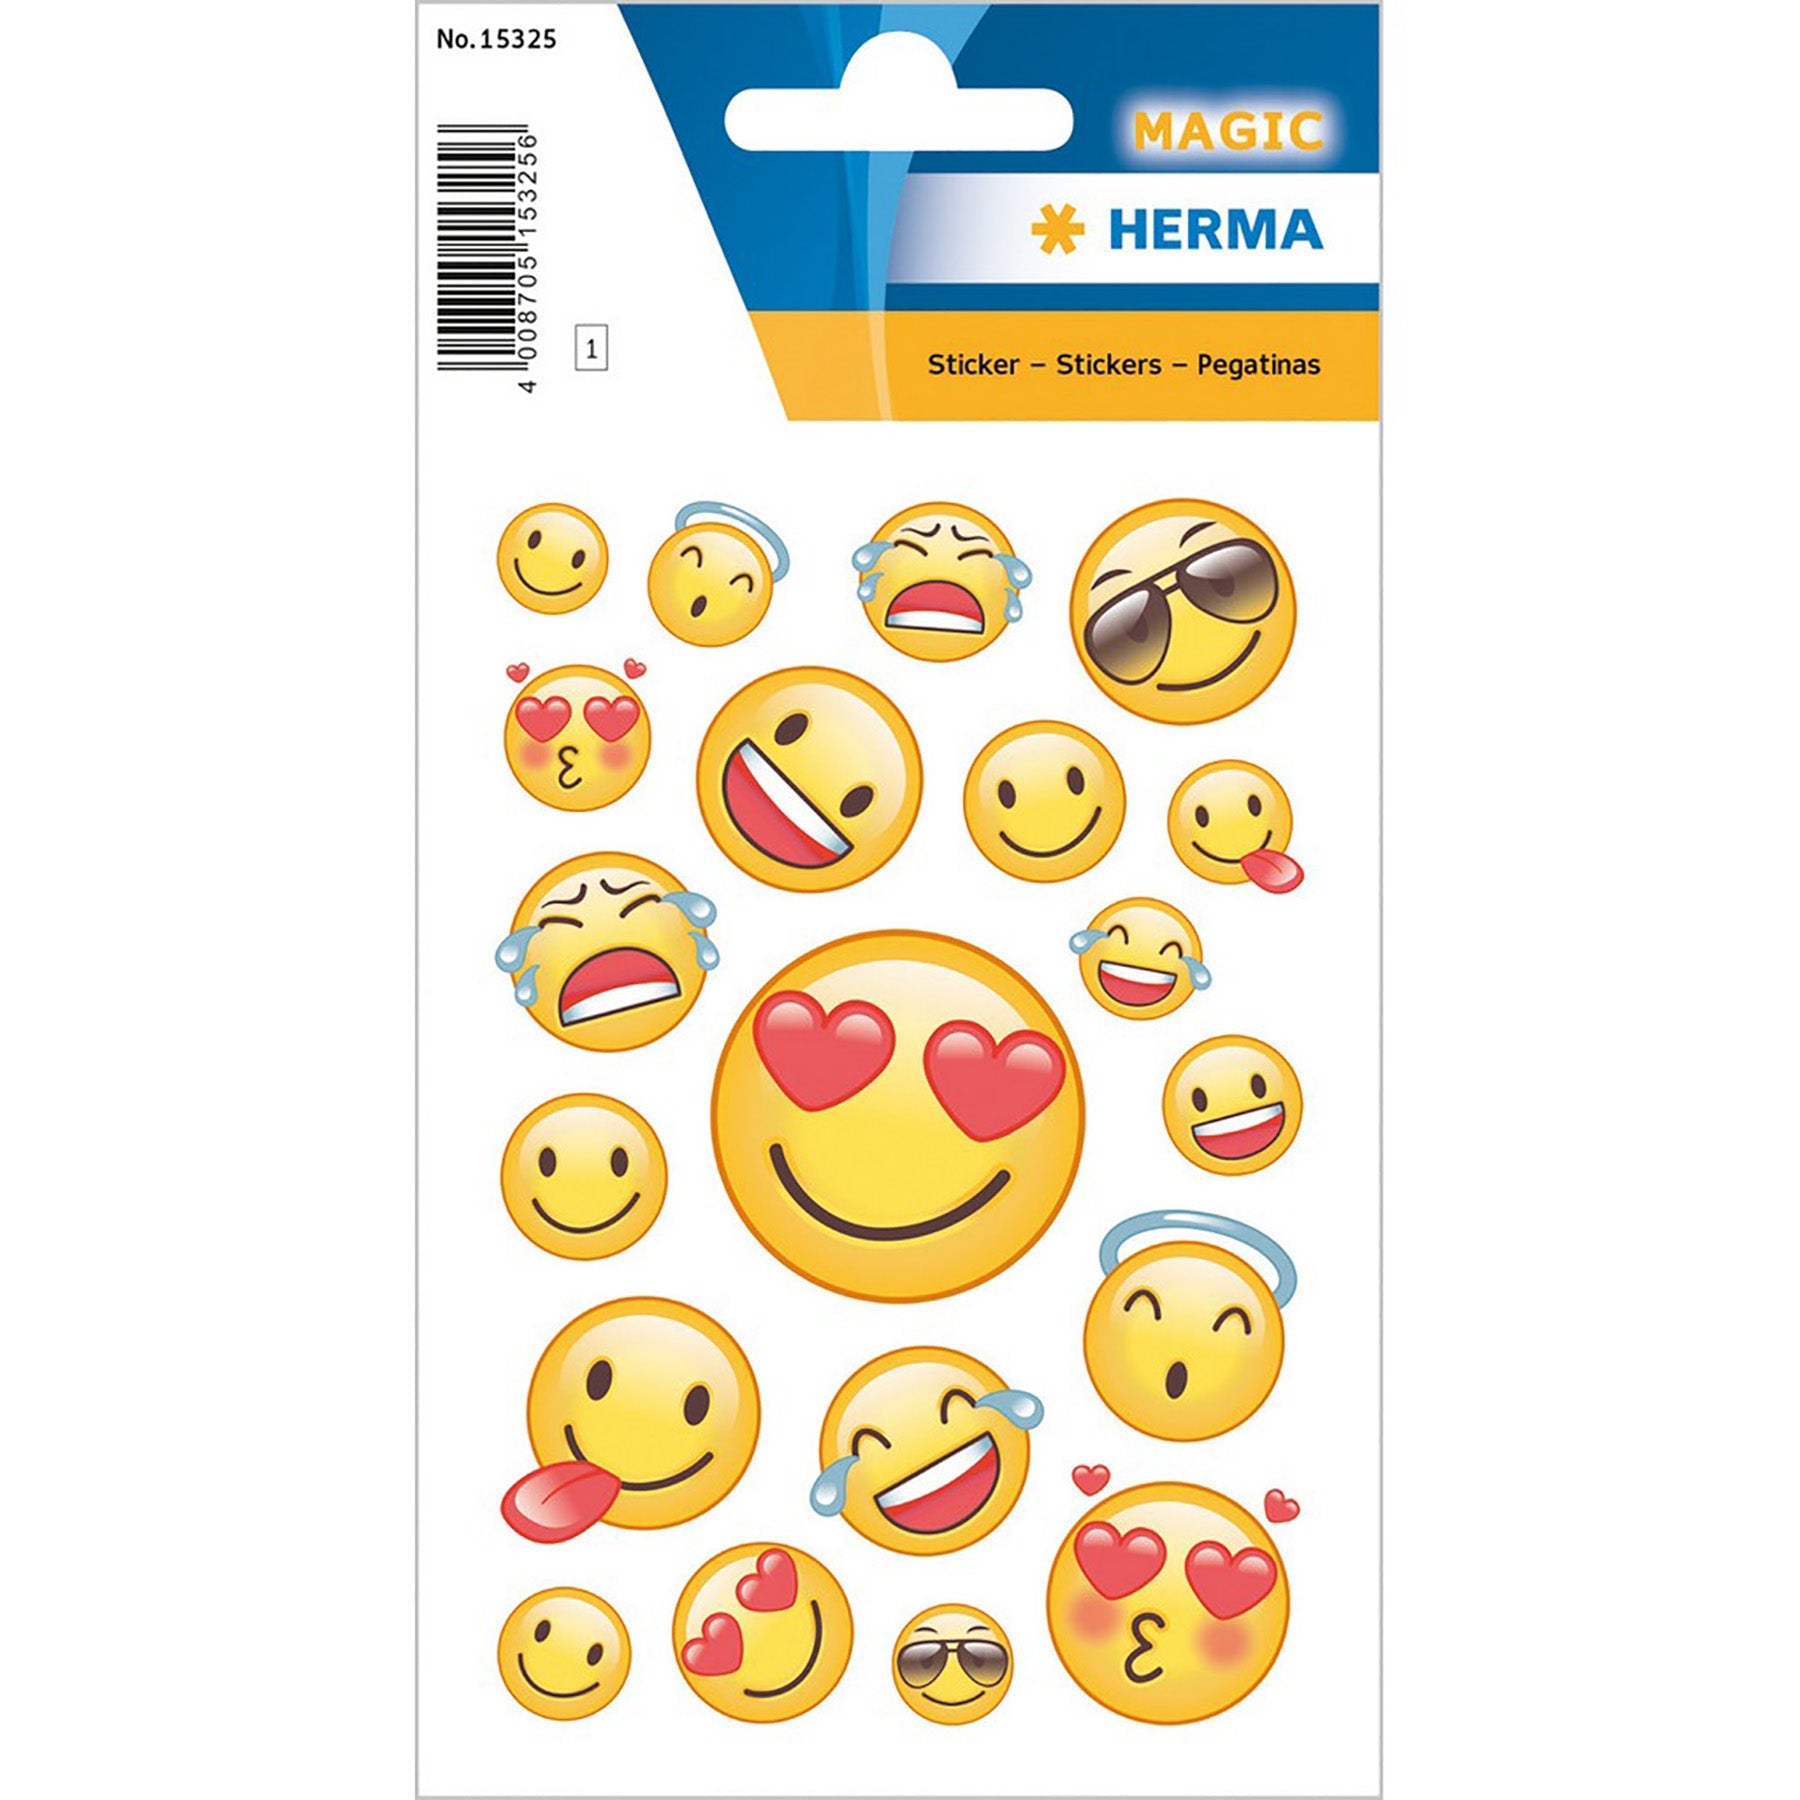 Herma Magic Stickers Happy Smile Transpuffy 4.75x3.1in Sheet